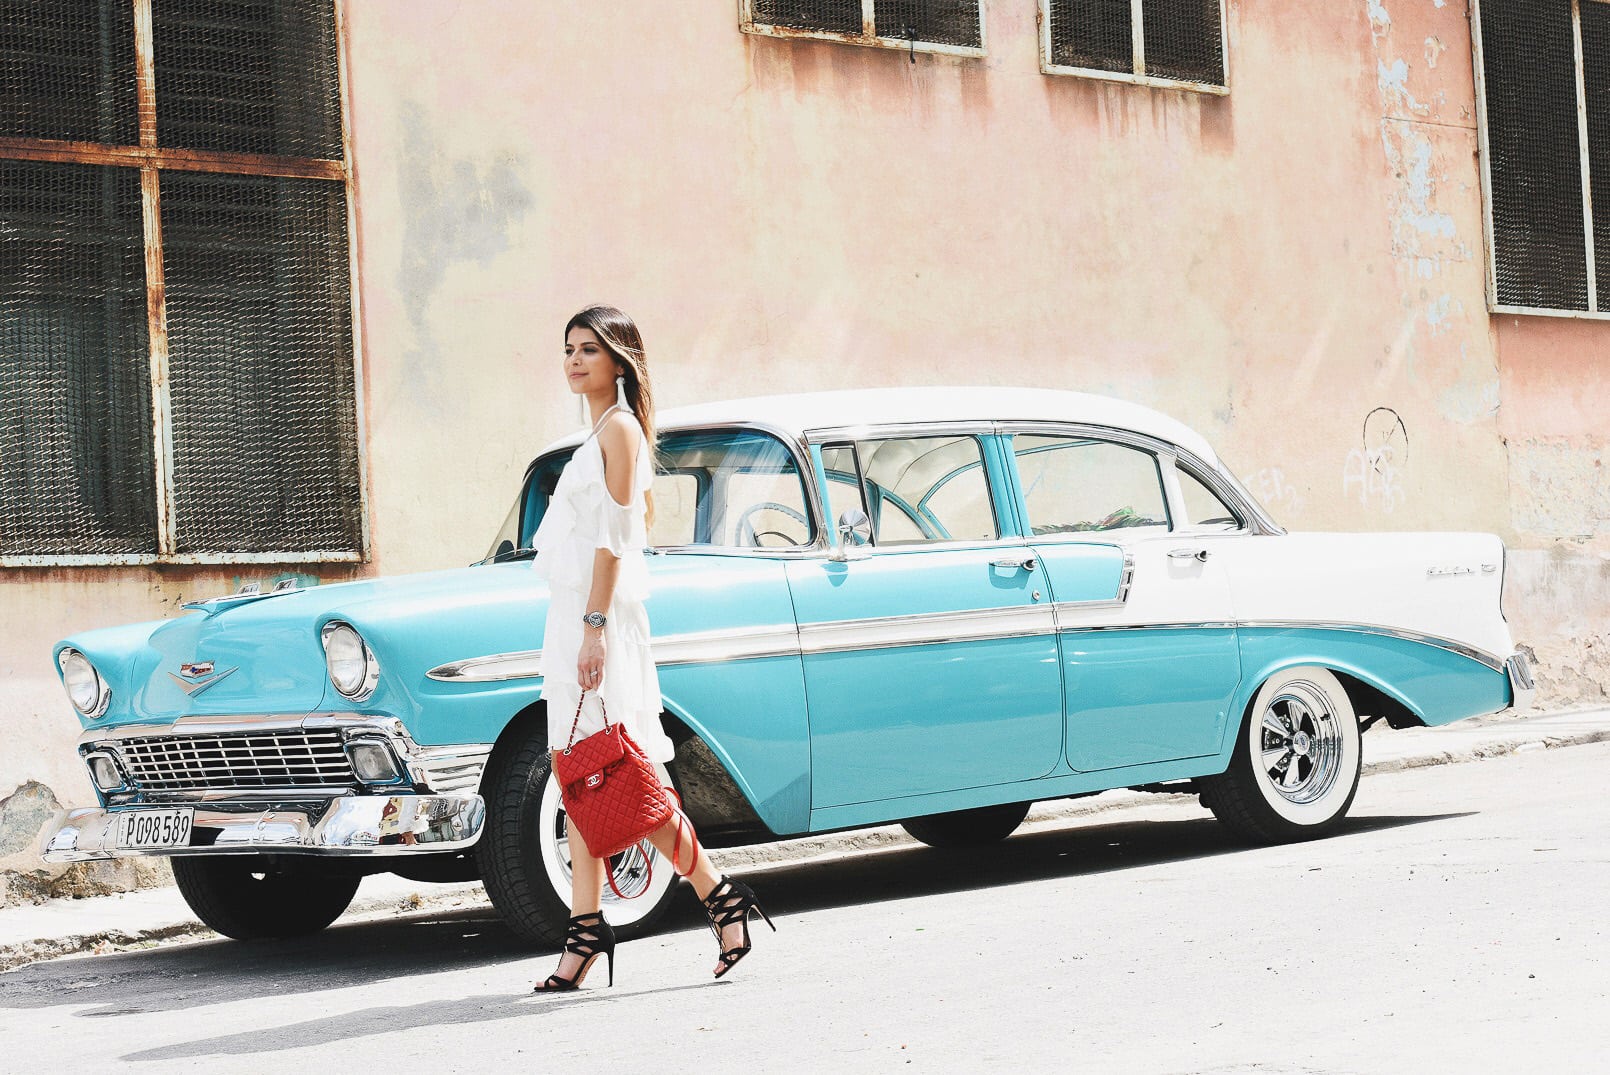 CHANEL Editorial in Cuba, Ruffle White Dress, The Girl From Panama @pamhetlinger